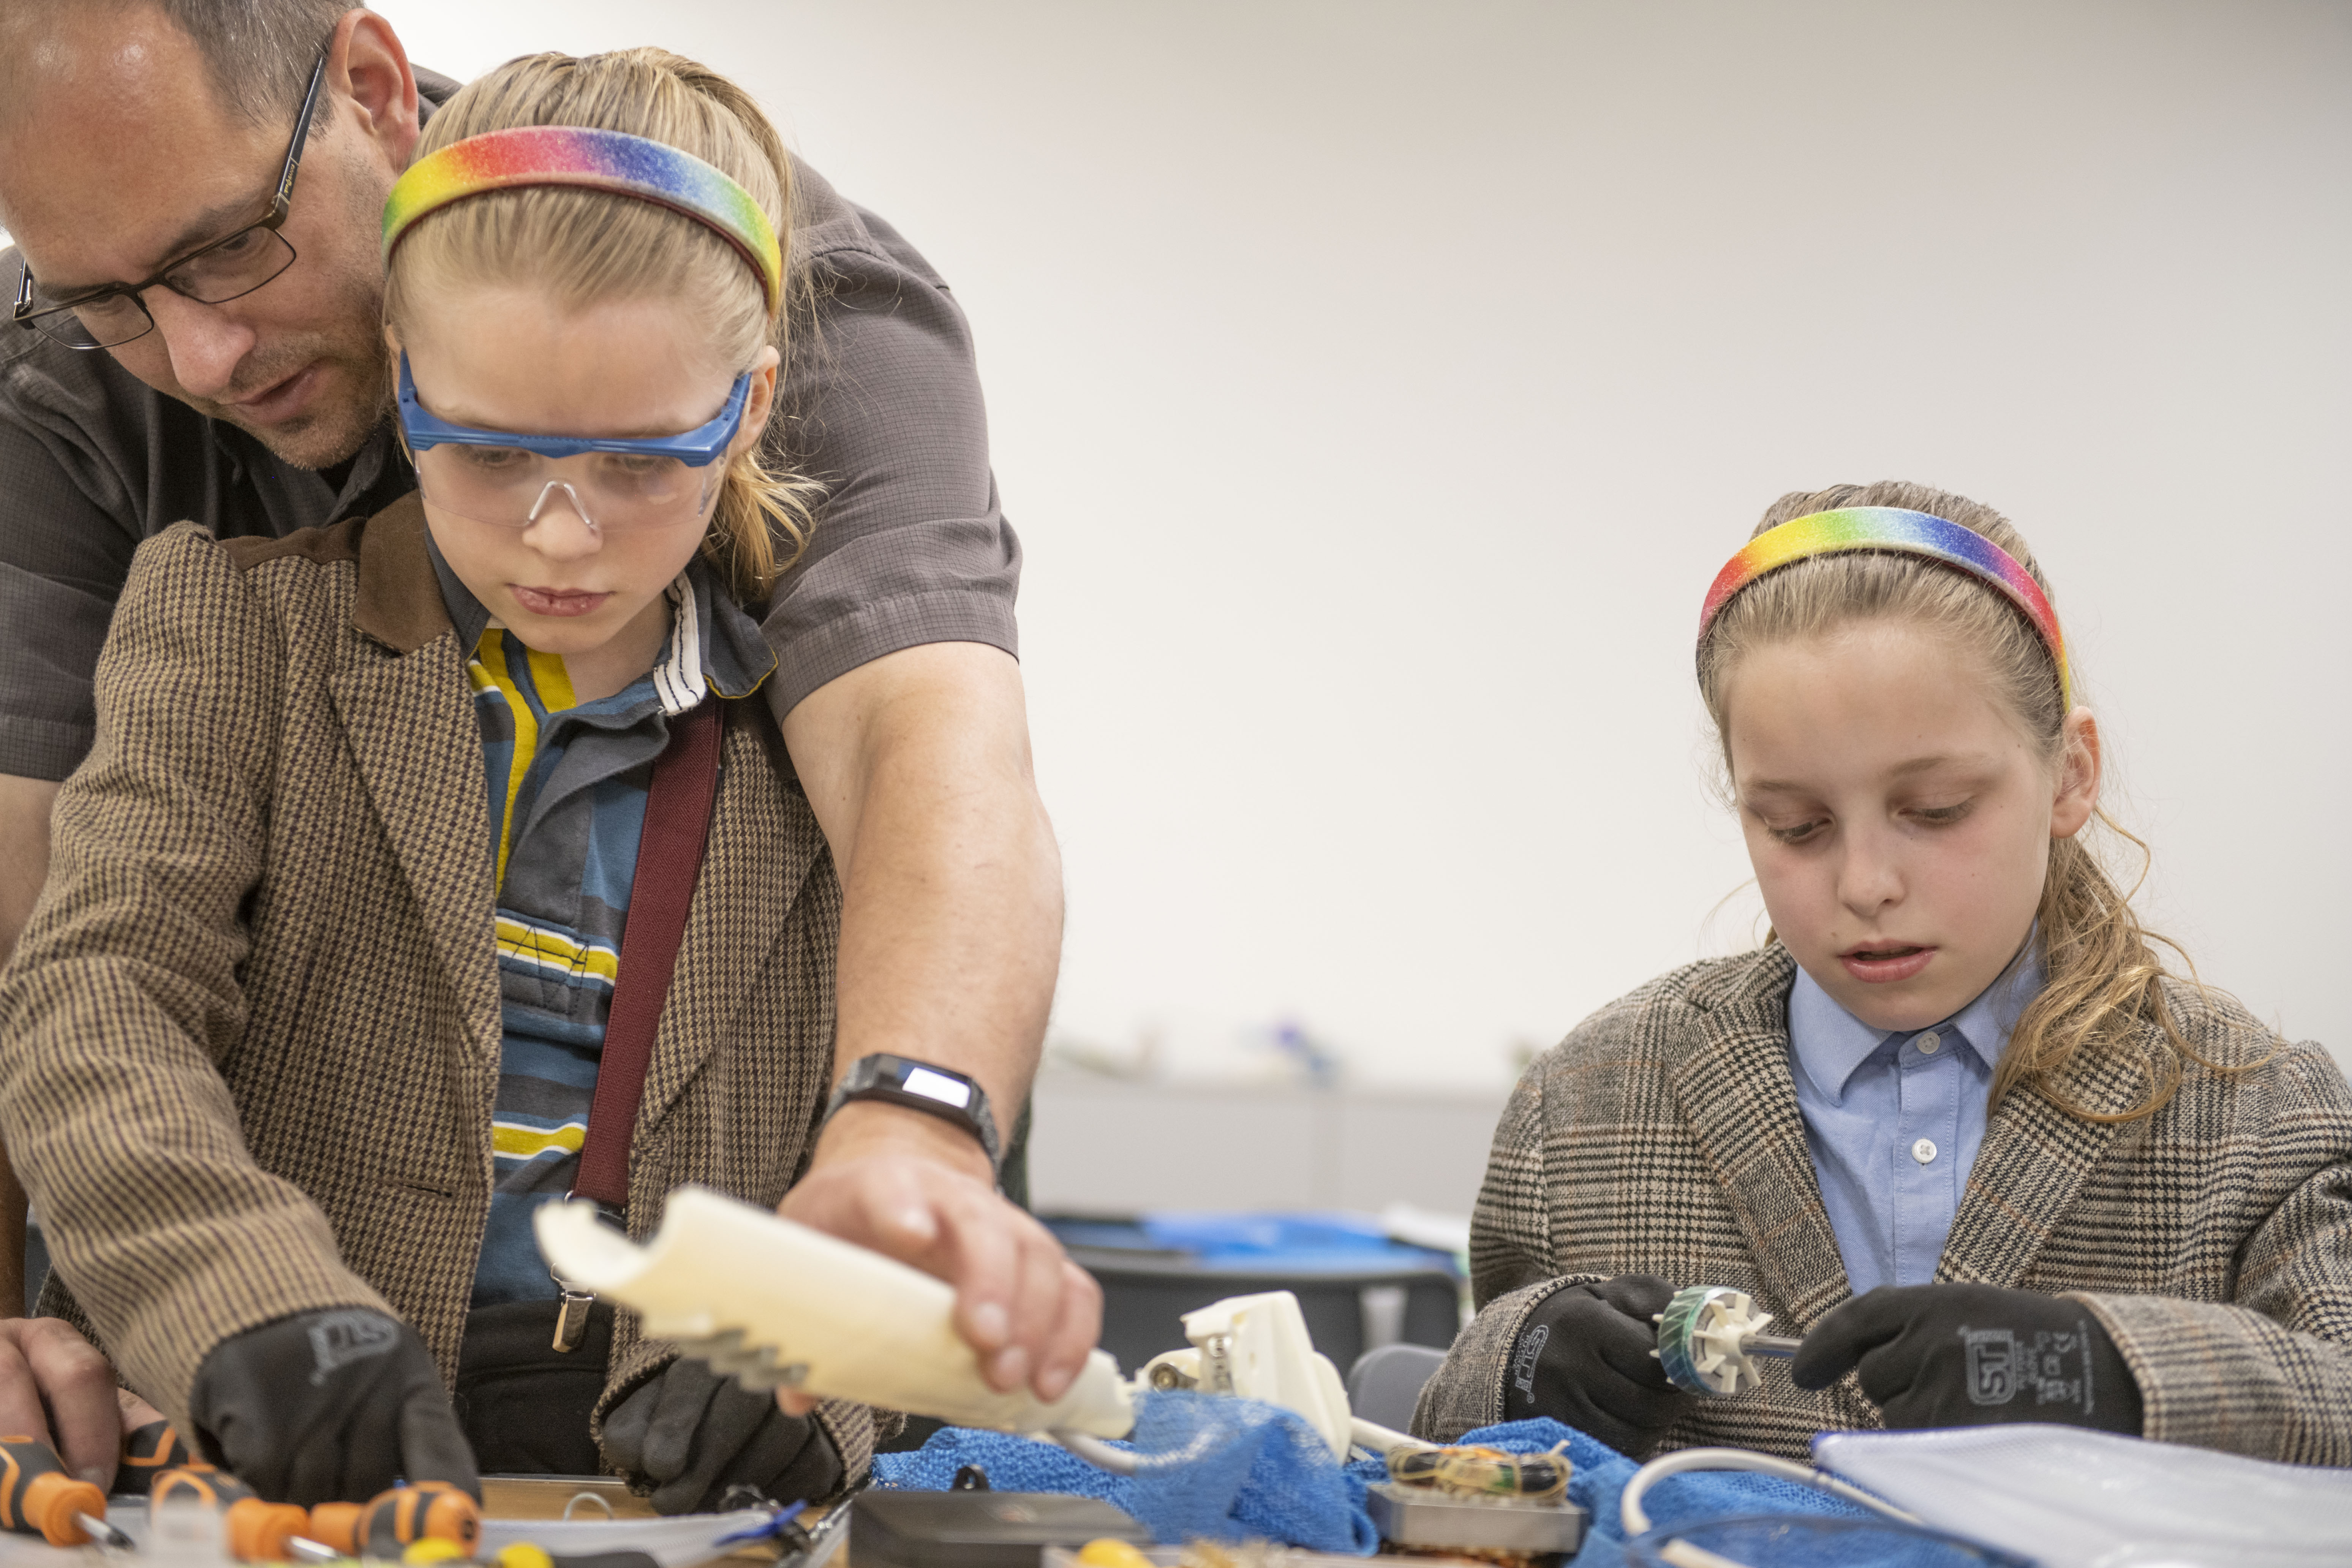 Two girls with ponytails, blazers and and matching rainbow coloured headbands are working with tools at a table. Both are wearing protective gloves and the girl on the left is wearing safety goggles. Behind her, a man helps her with some of the objects on the table.